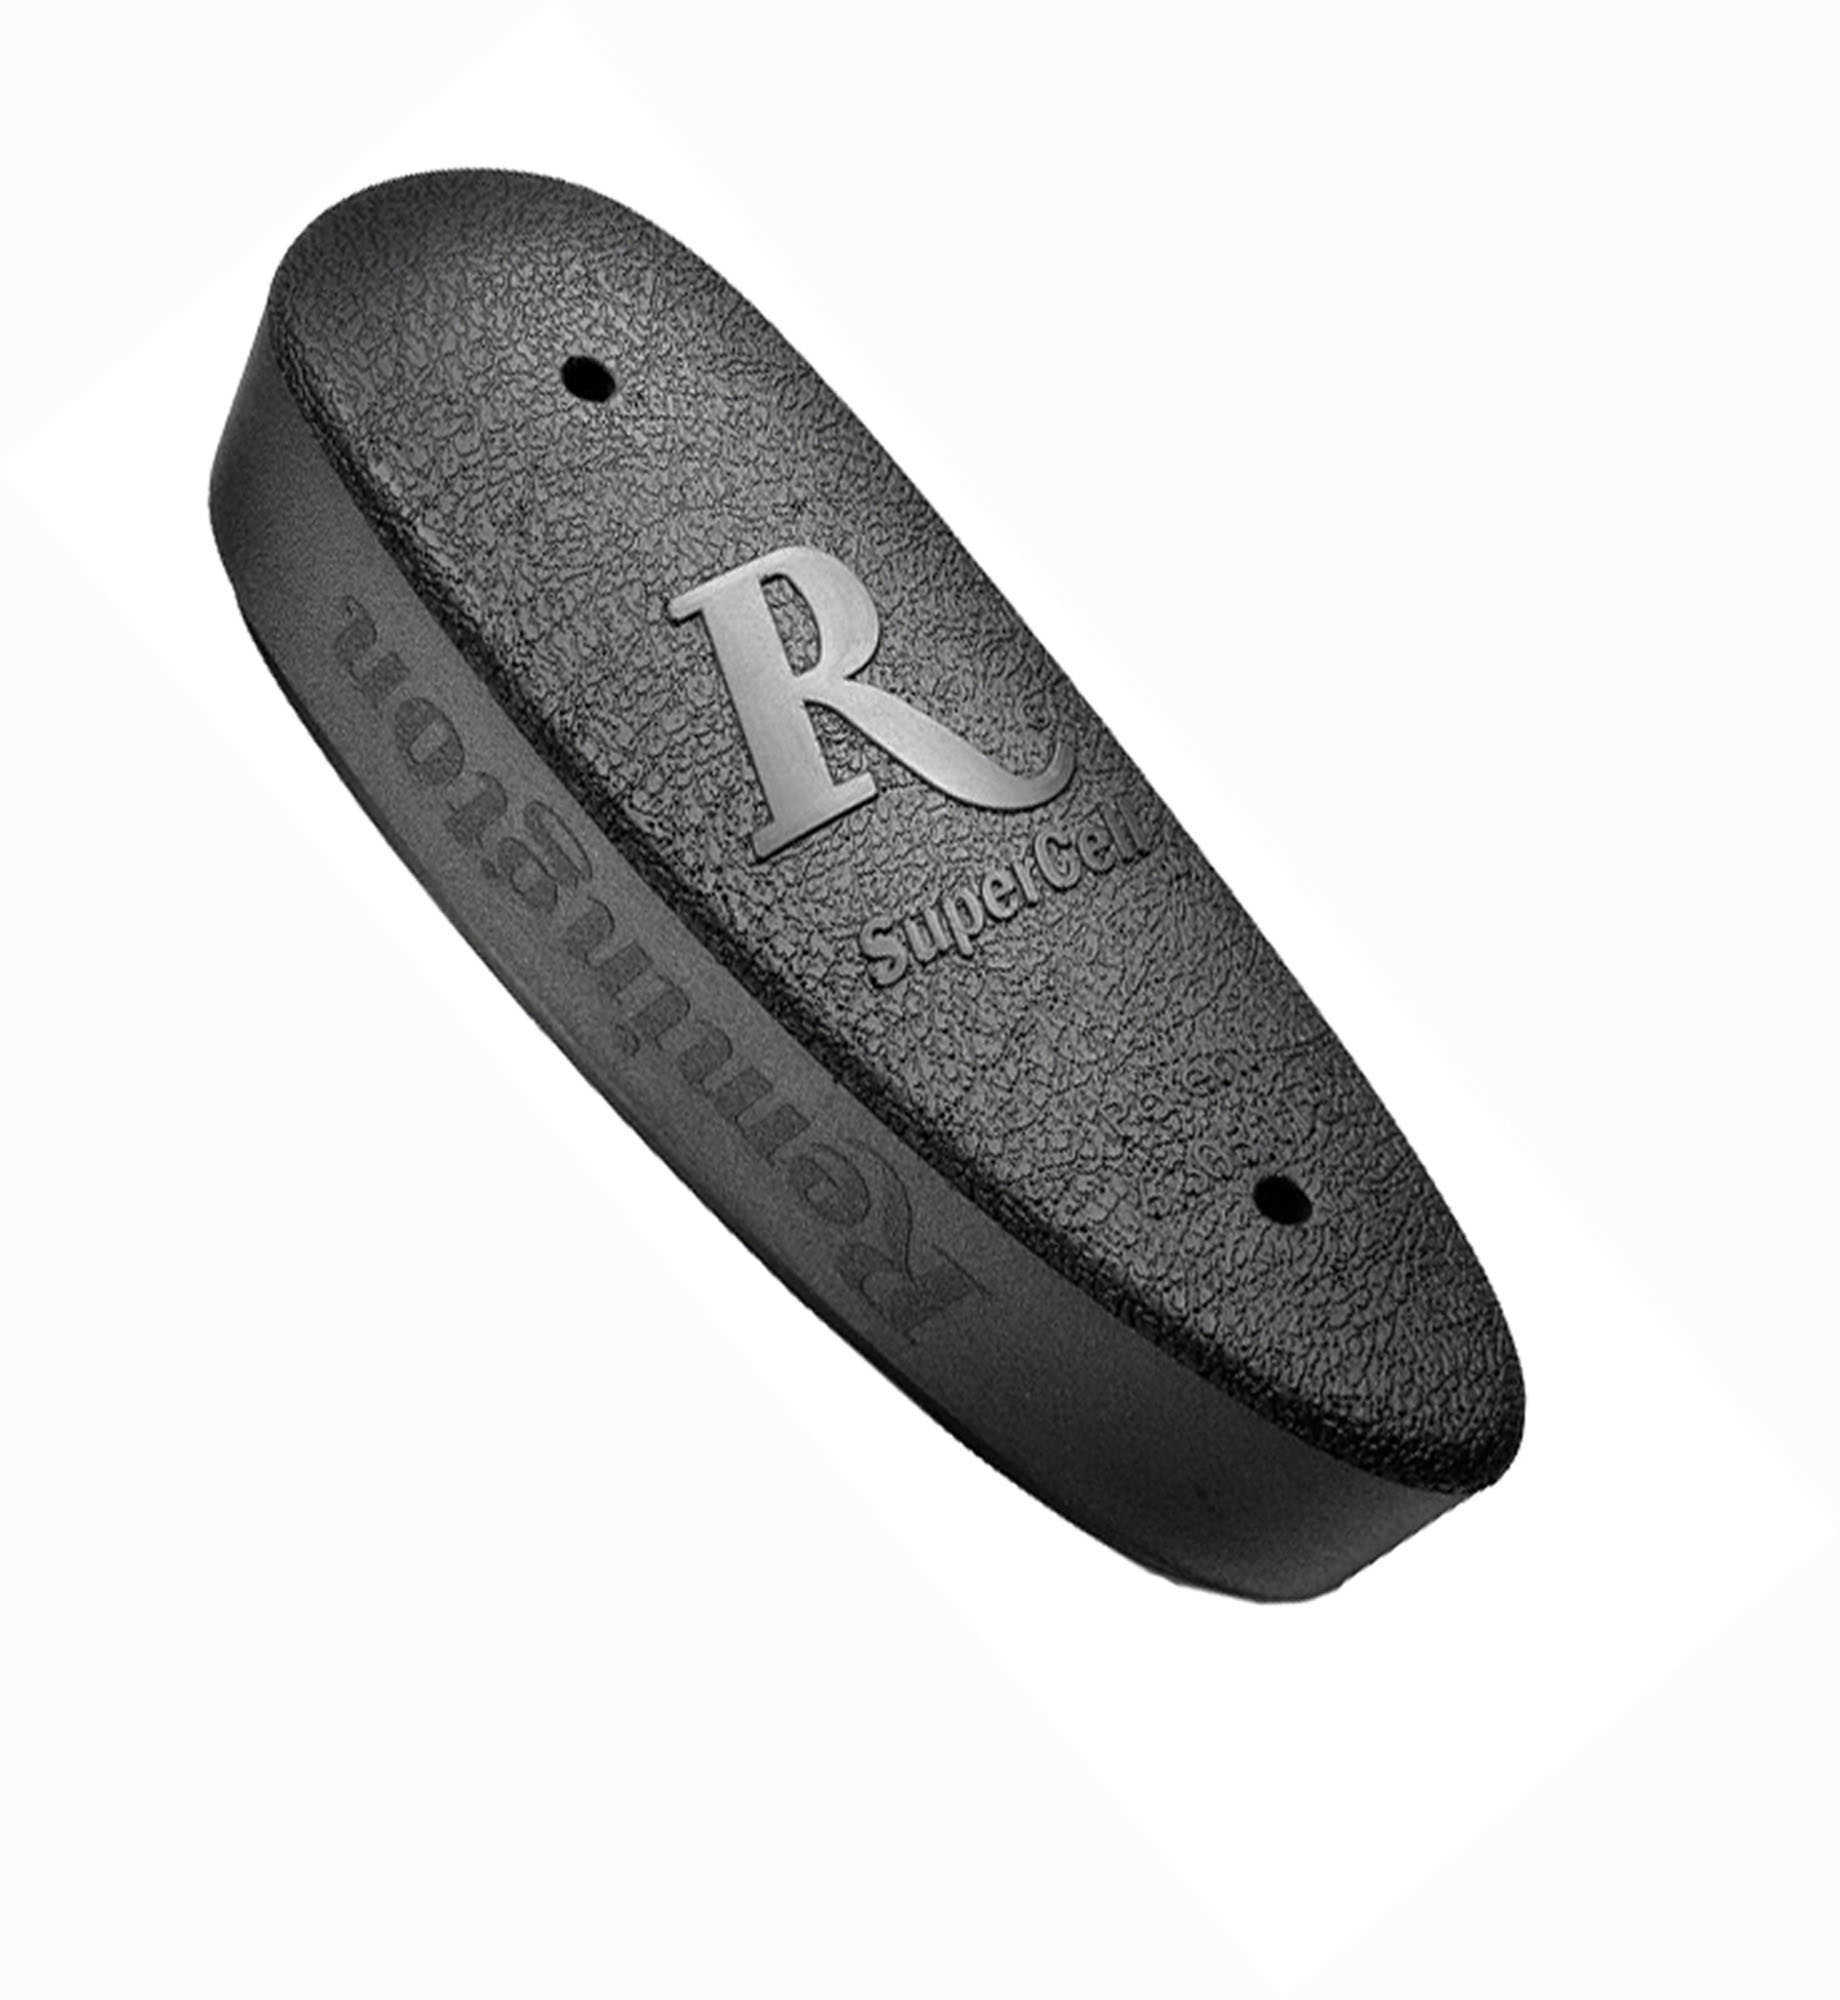 Remington Supercell Recoil Pad For Rifles with Synthetic Stocks Black 19484